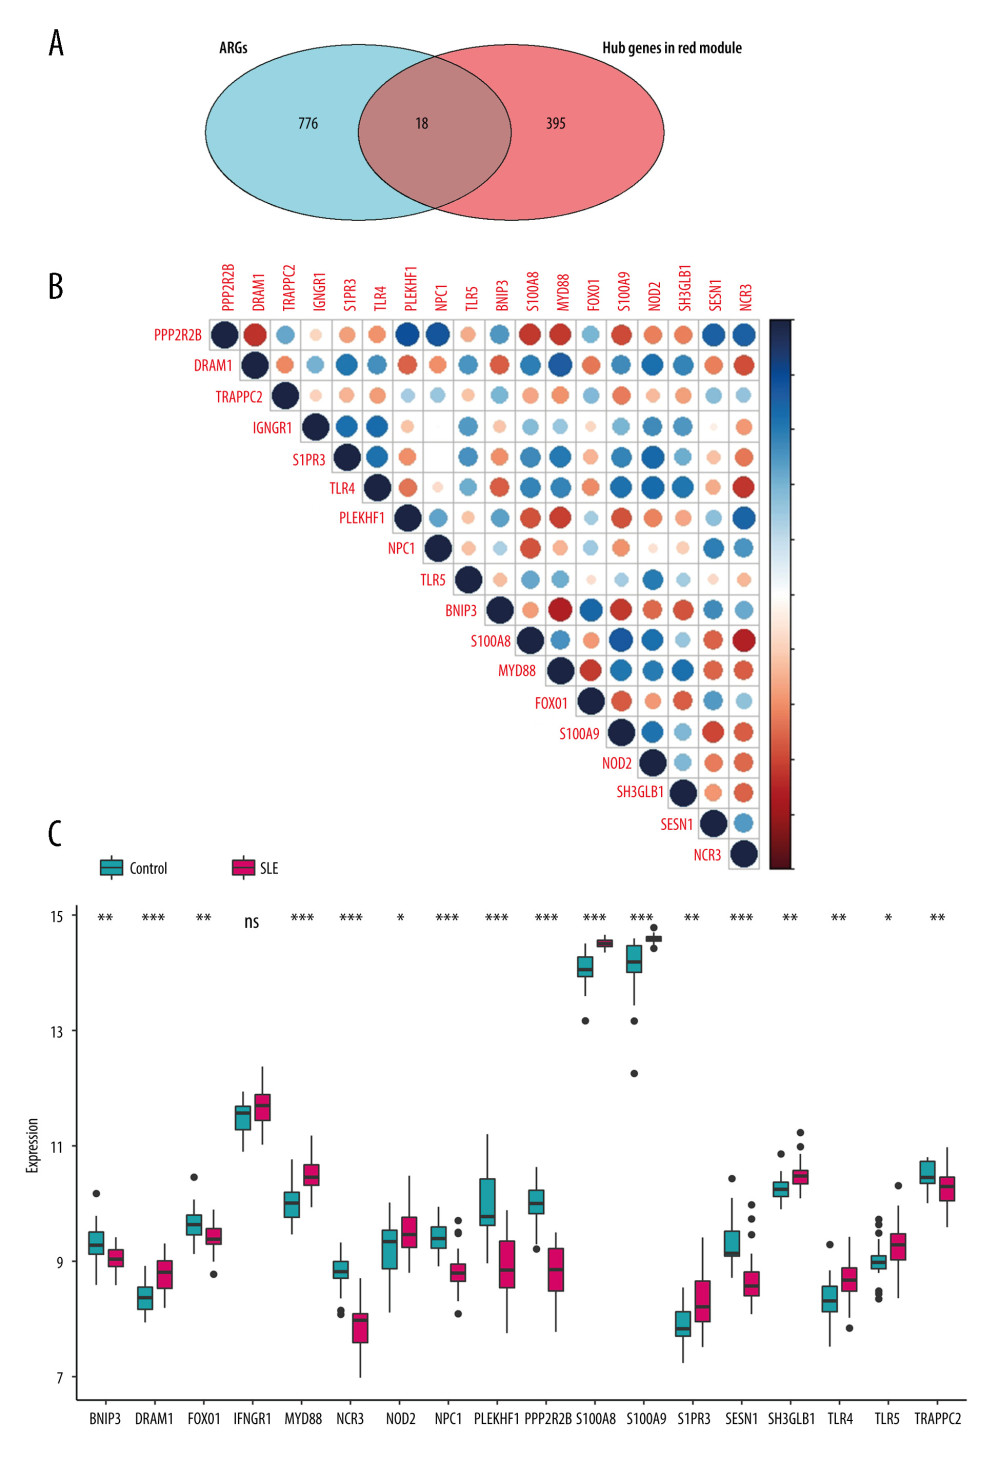 Identification of feature ARGs. (A) Selection of real hub genes in the ARGs and red modules. (B) Correlation heatmap shows gene co-expression patterns among ARGs. The colors represent correlations, and the size of the circles represent the size of the p values. (C) Boxplot shows the median expression level of each ARGs in both control and SLE samples, represented by red and green boxes, respectively.